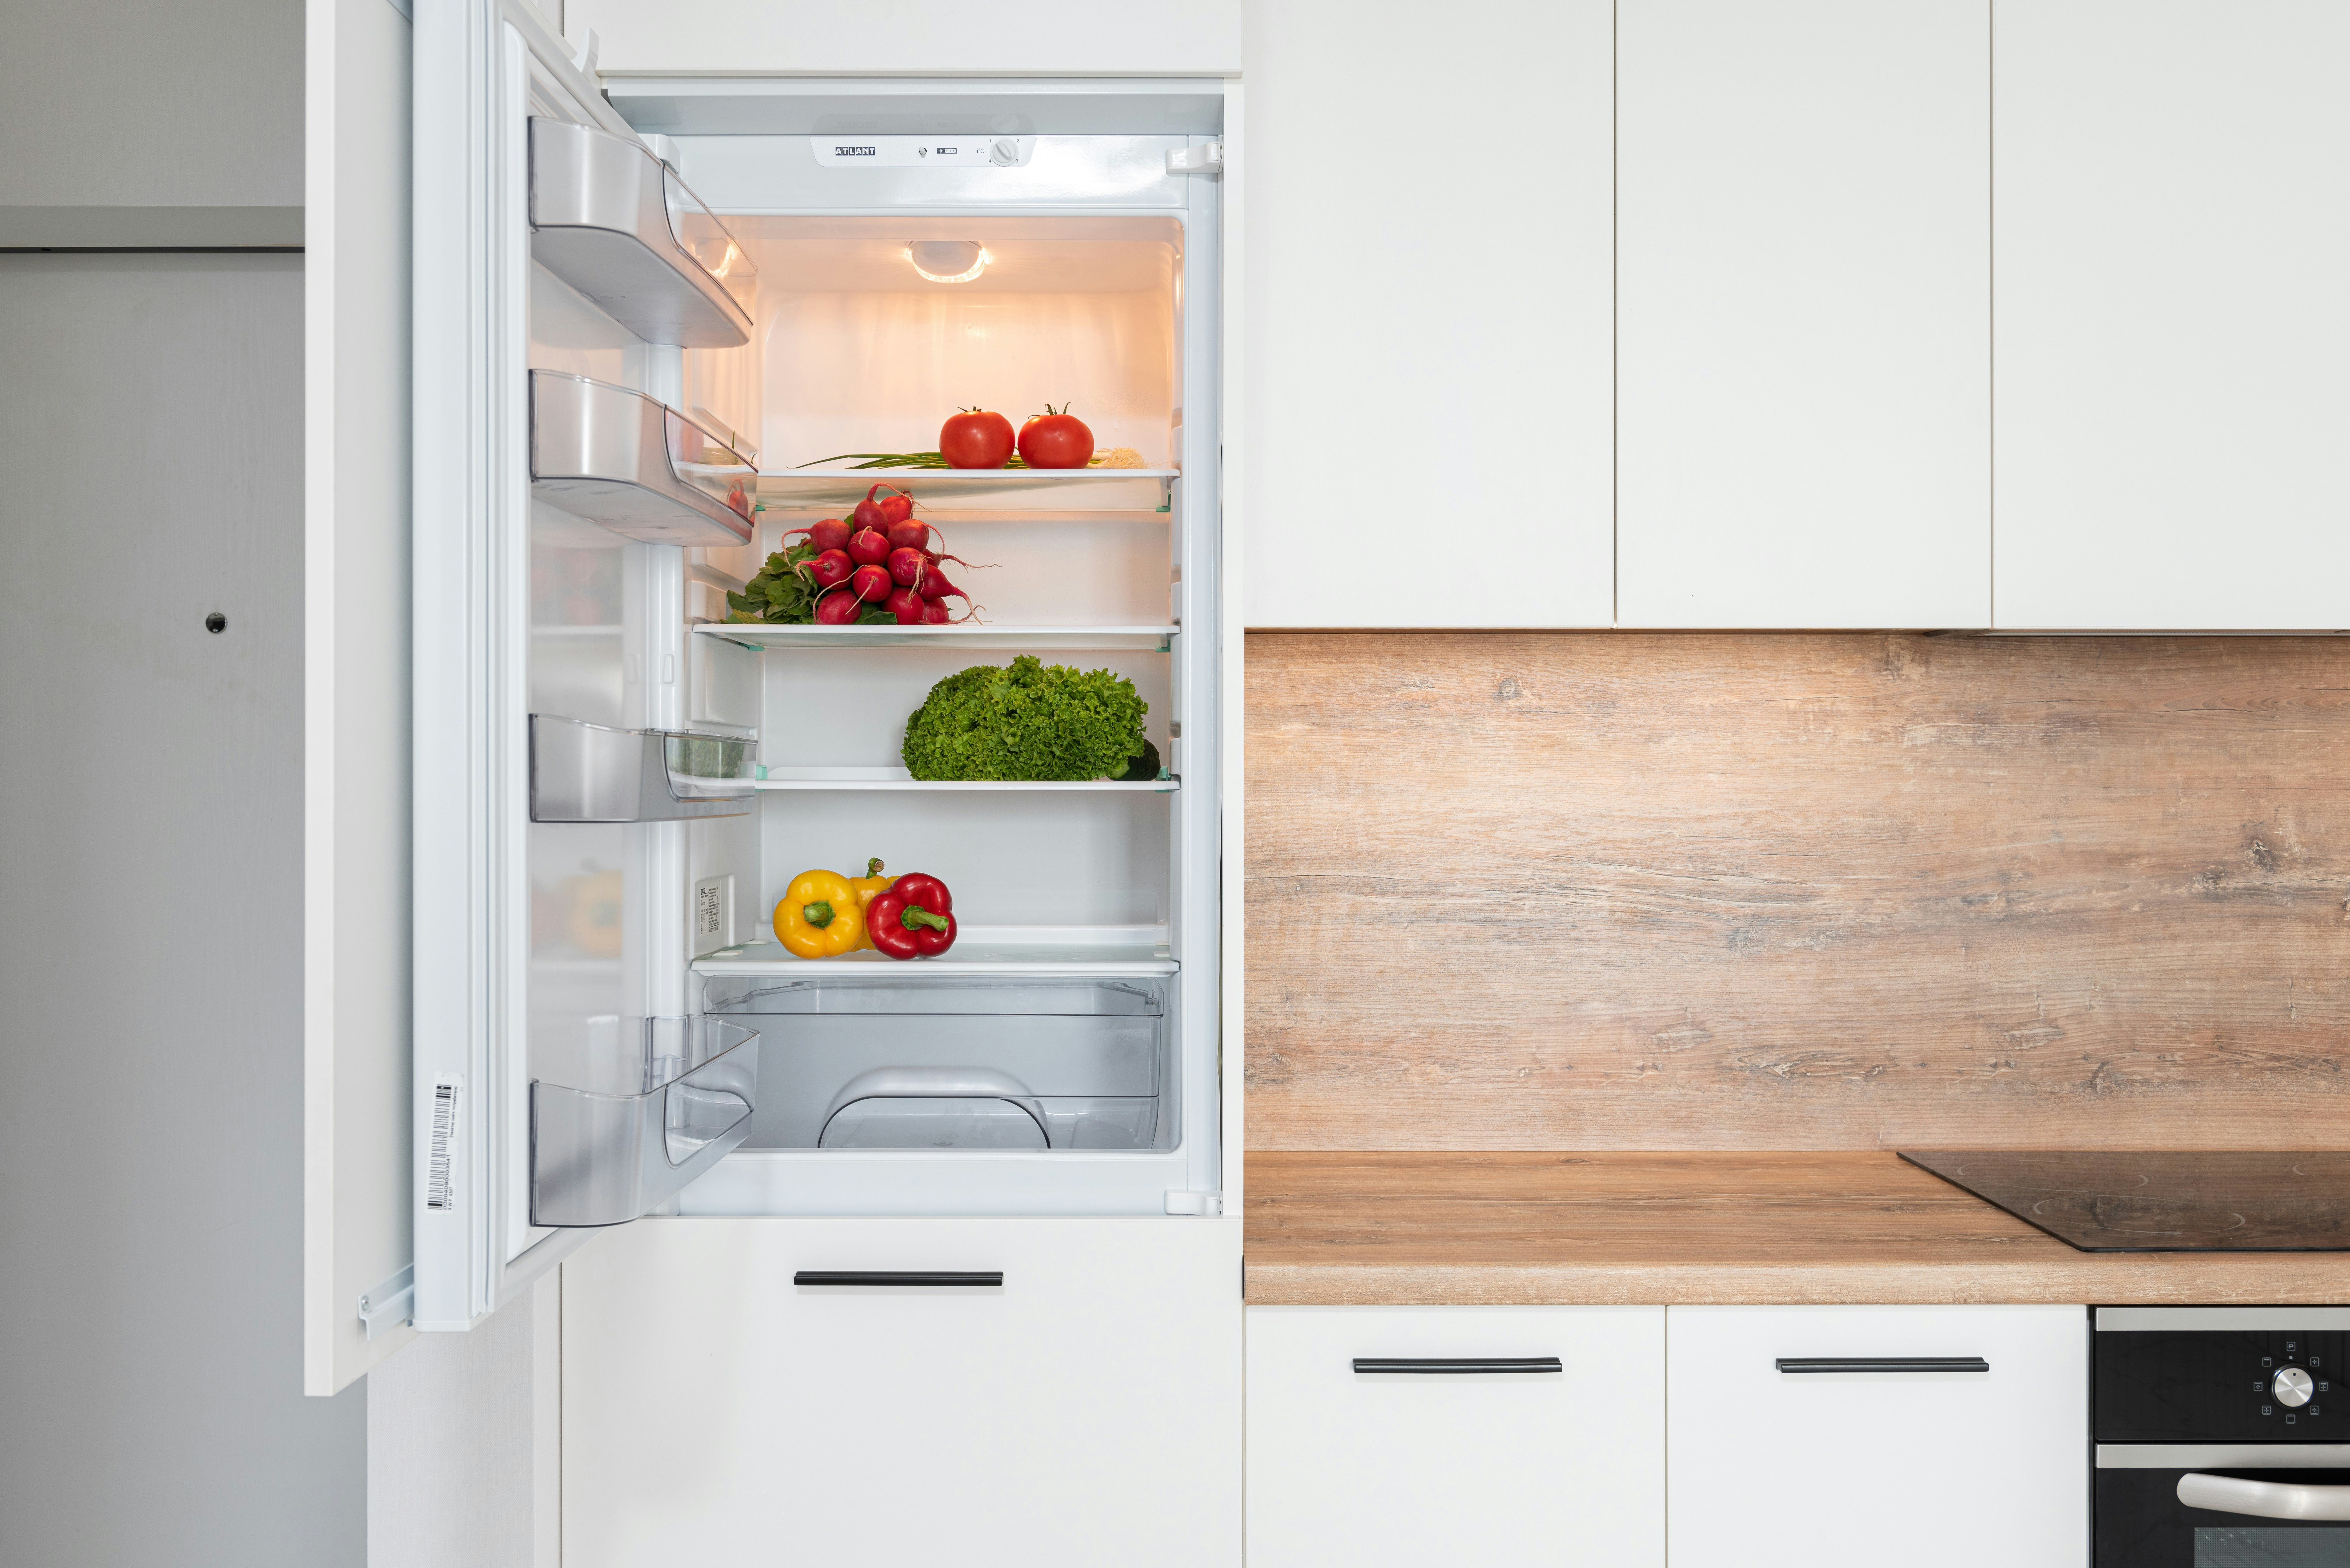 An image of a refrigerator, where you should store your celery juice.